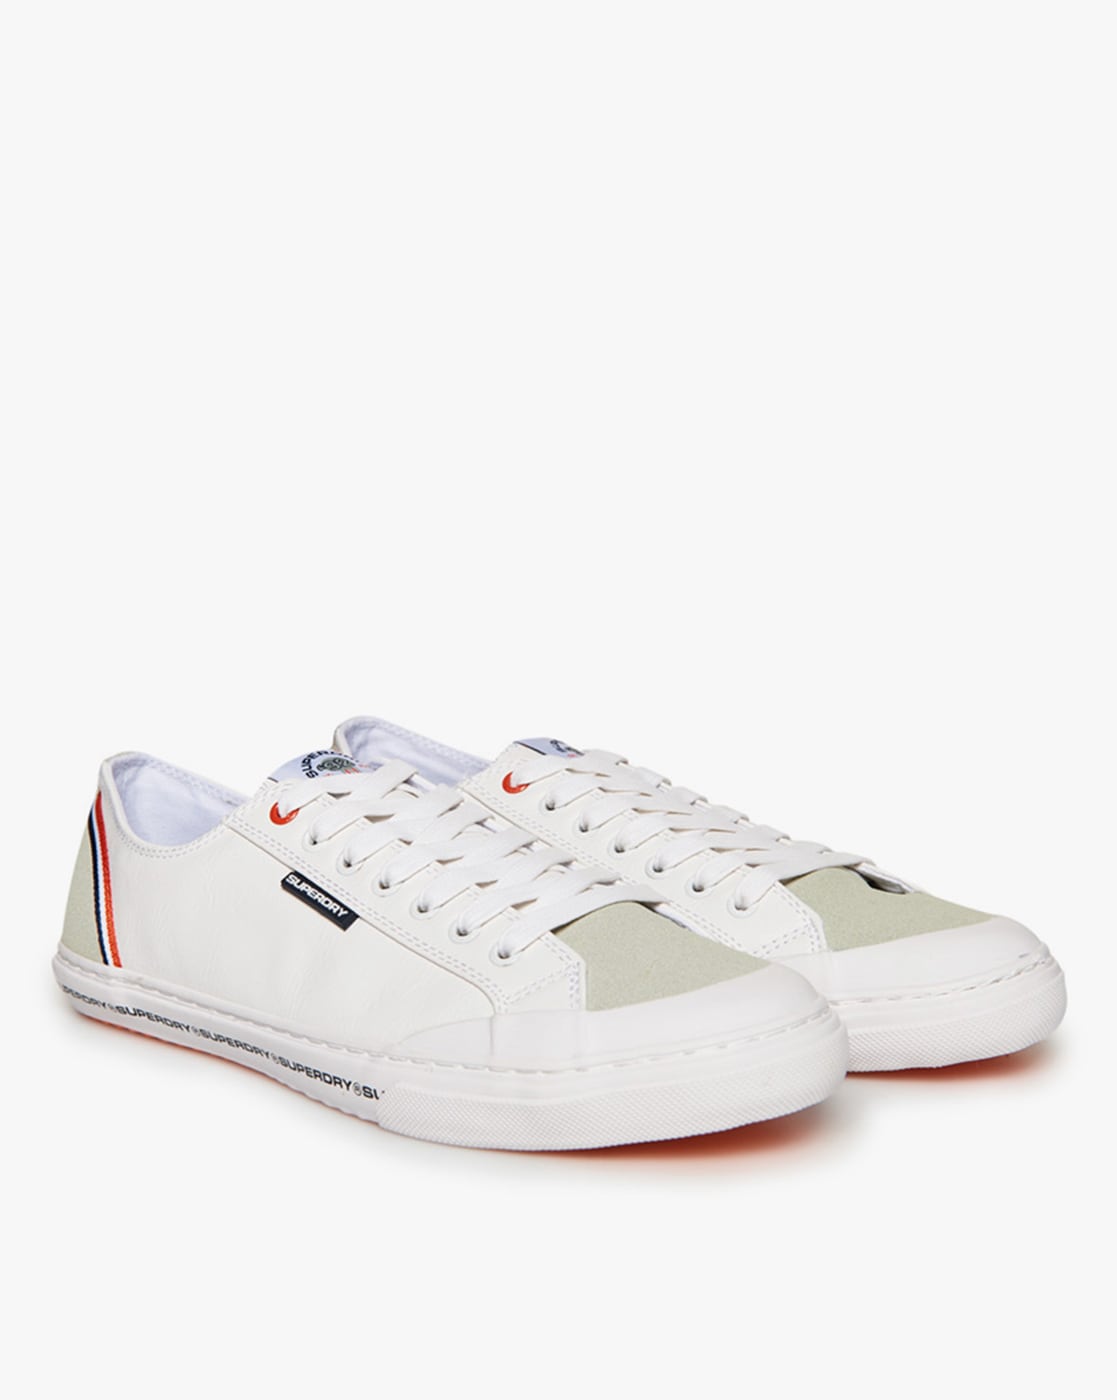 superdry white shoes